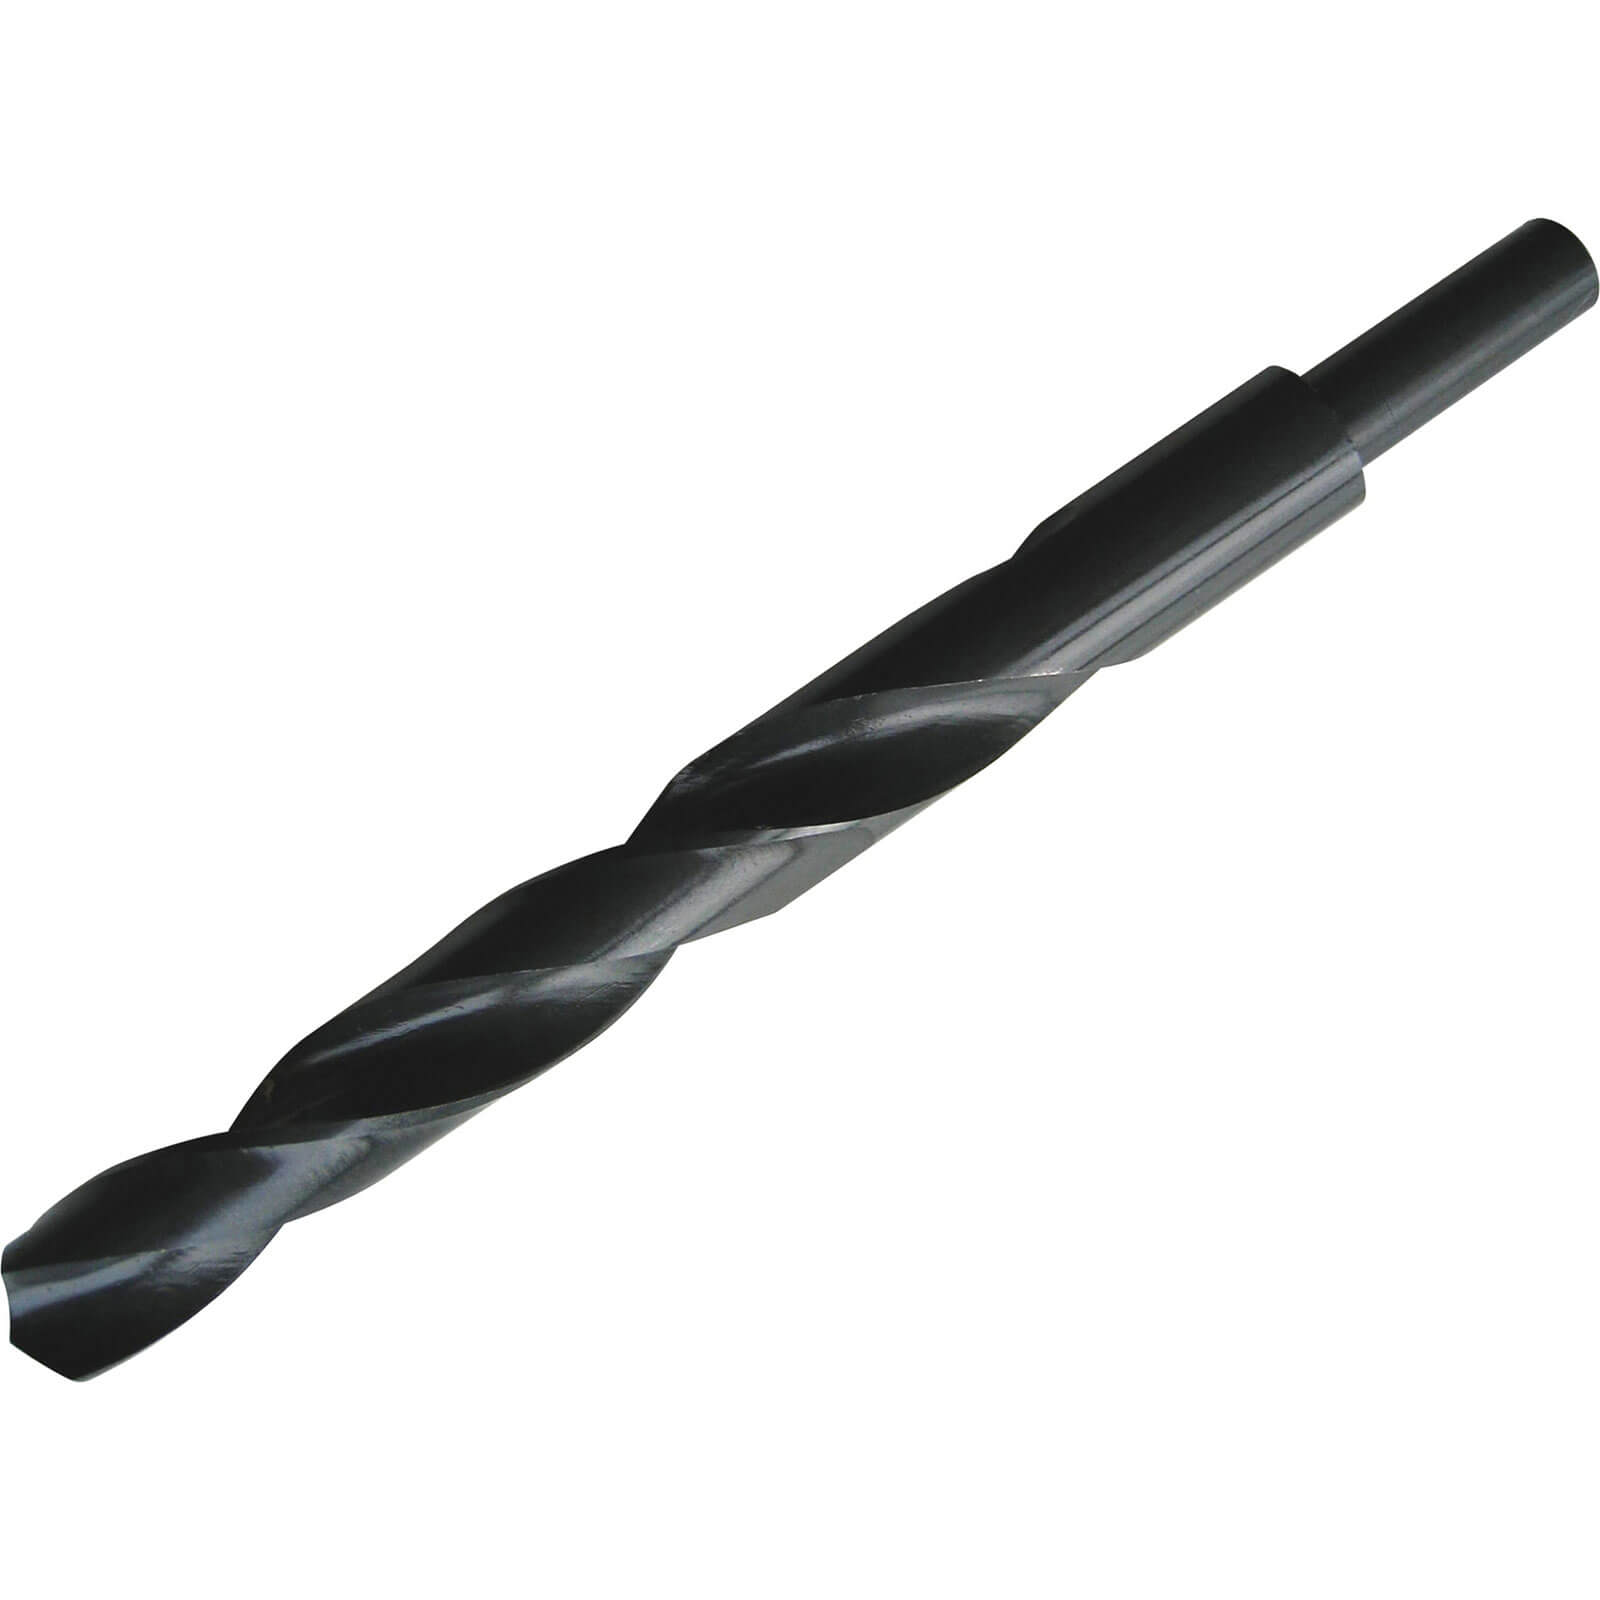 Photo of Irwin Hss Pro Drill Bits 14mm Pack Of 1